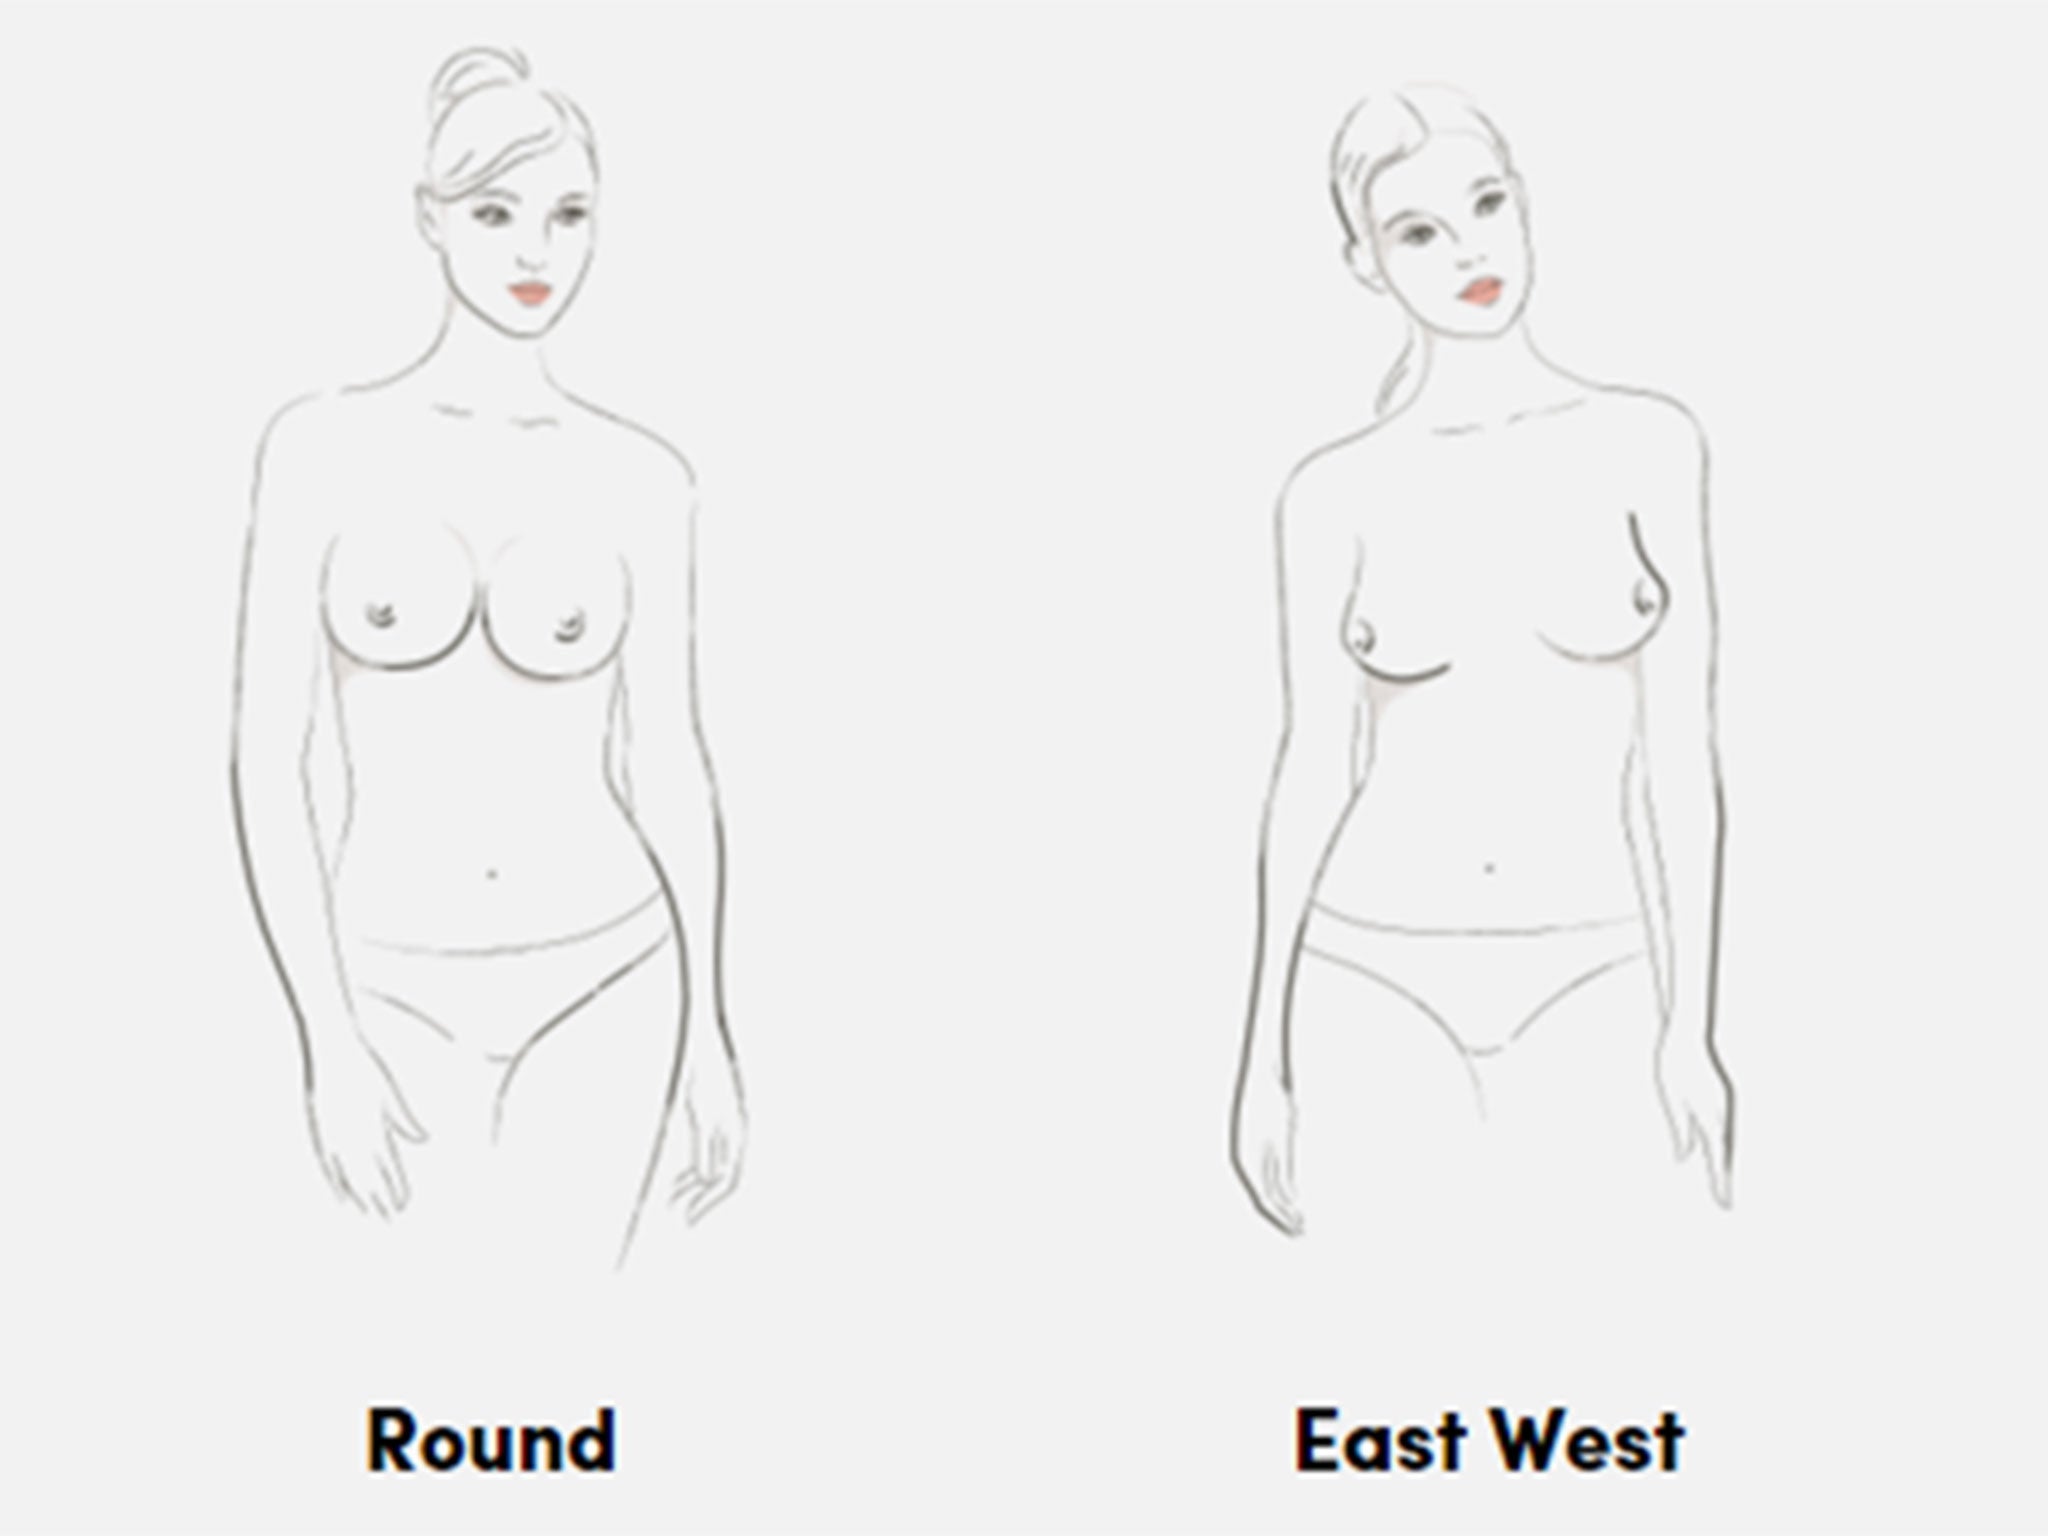 Breast Shape Dictionary – Finding Your Breast Shape & Type – ThirdLove